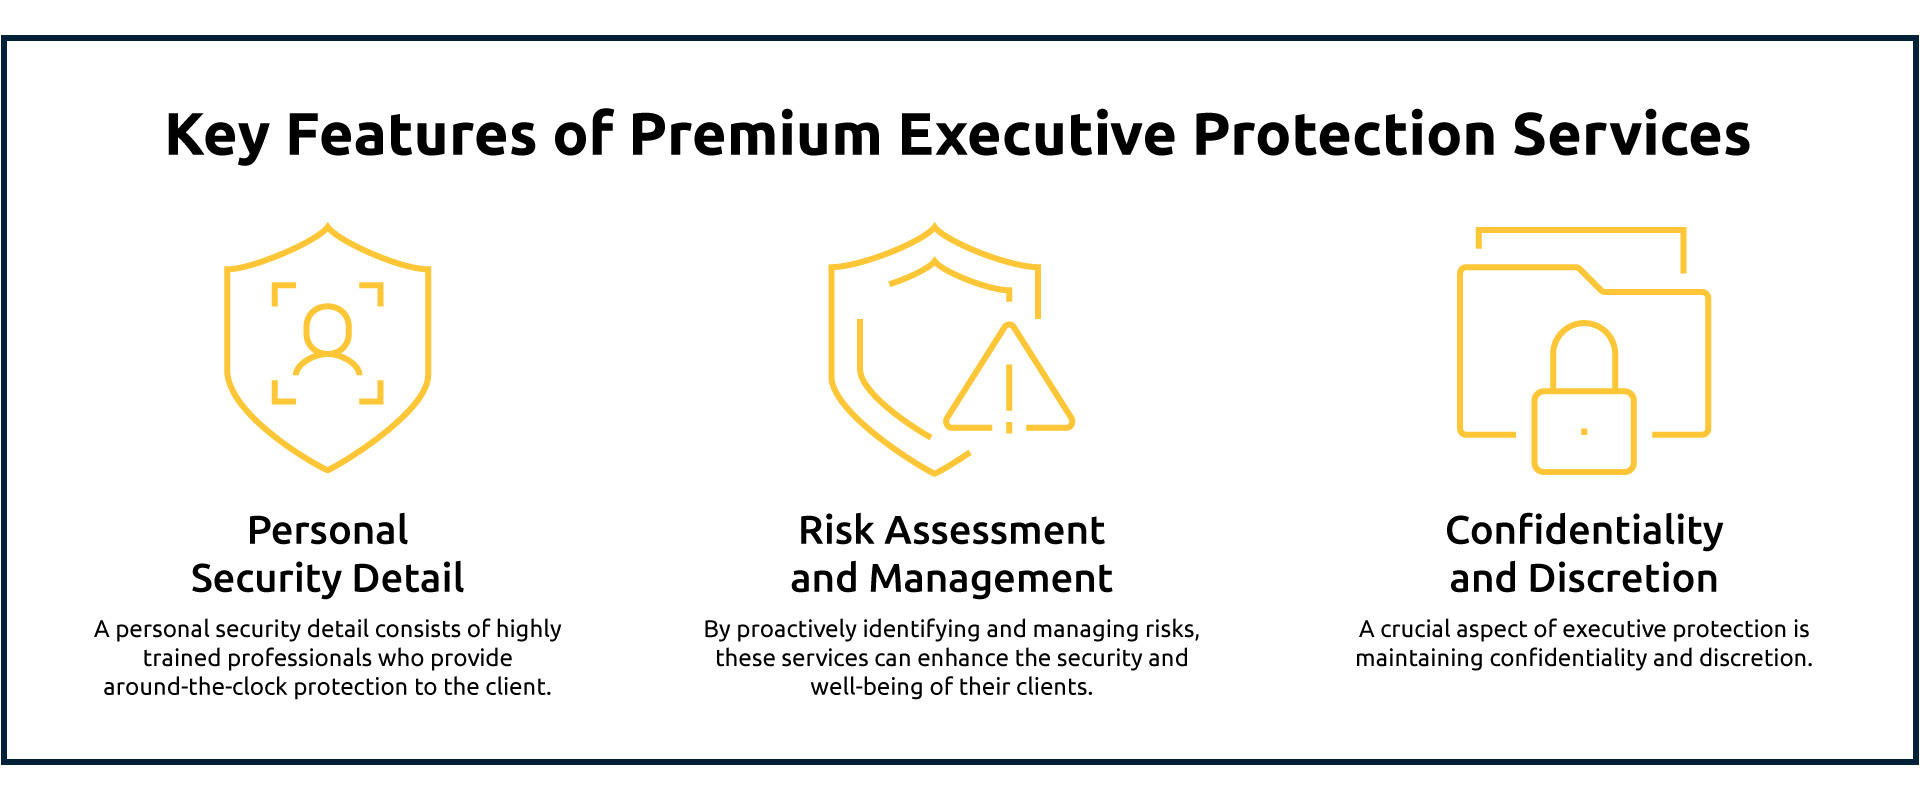 Key Features of Premium Executive Protection Services